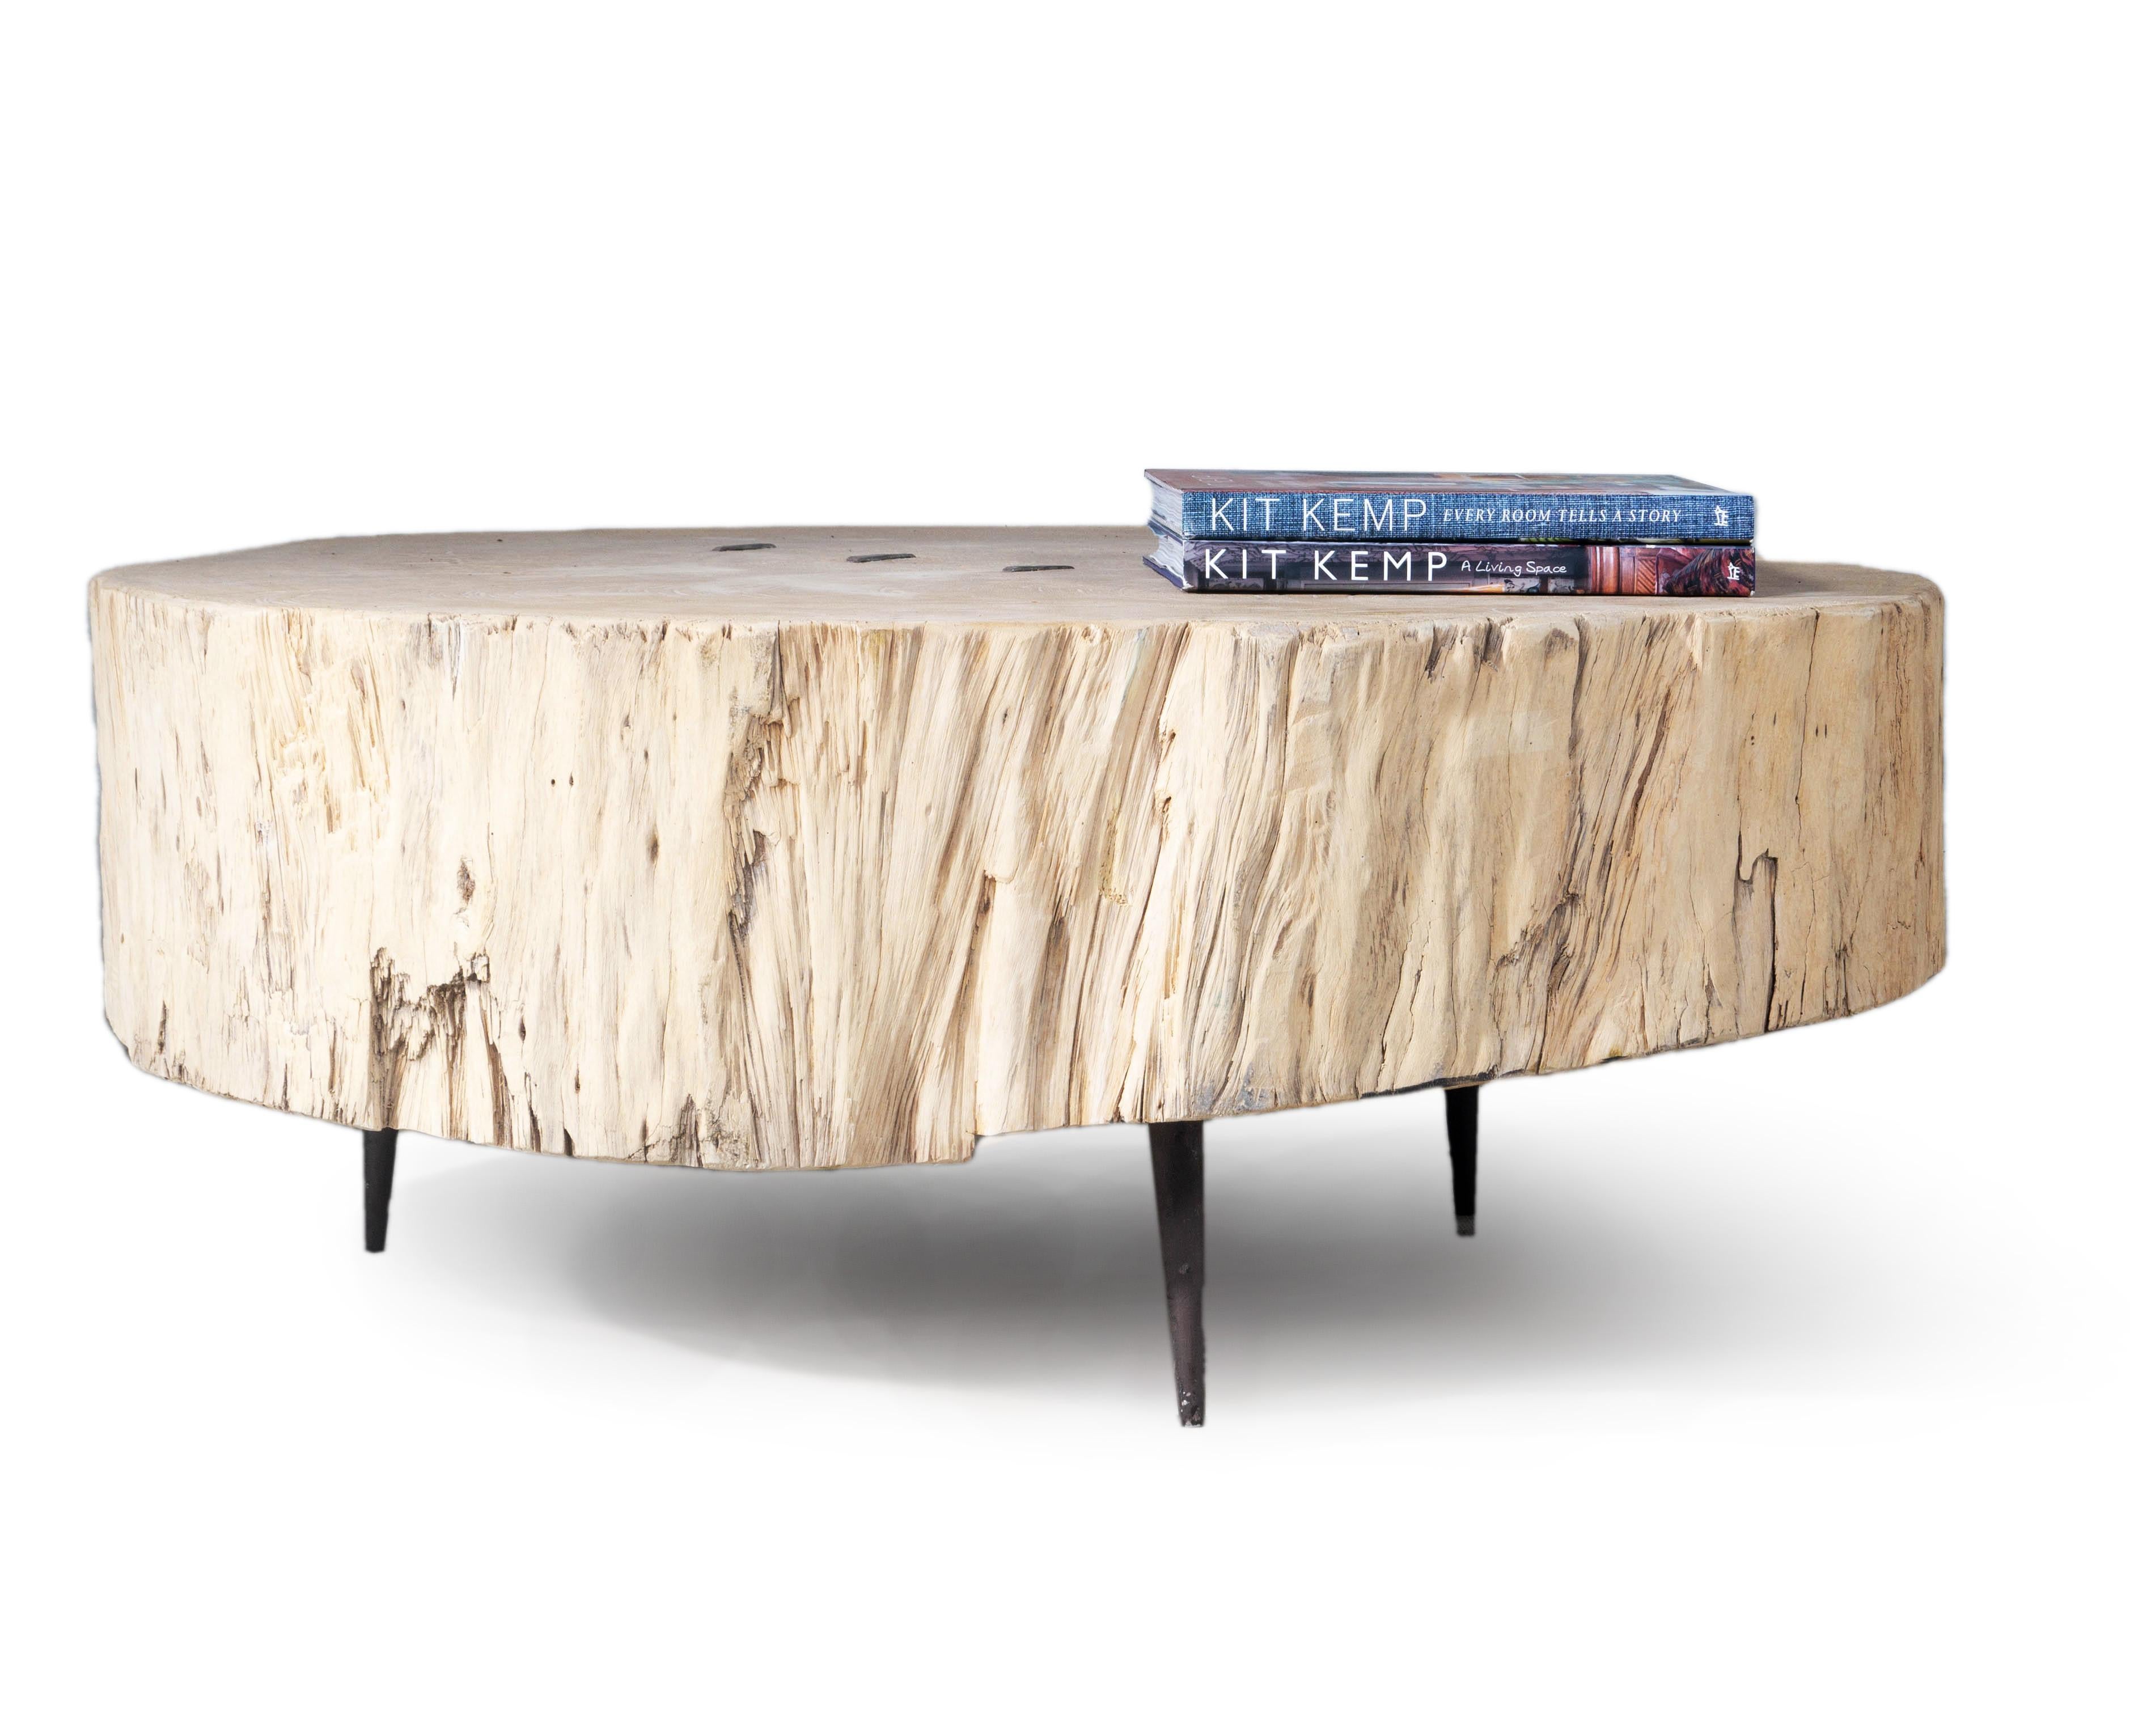 This elm stump coffee table will bring the natural beauty of wood into your home. Cleats have been wedged into the top of the elm for a handcrafted look, and simplistic metal legs have been added which add modern sophistication. The stump coffee